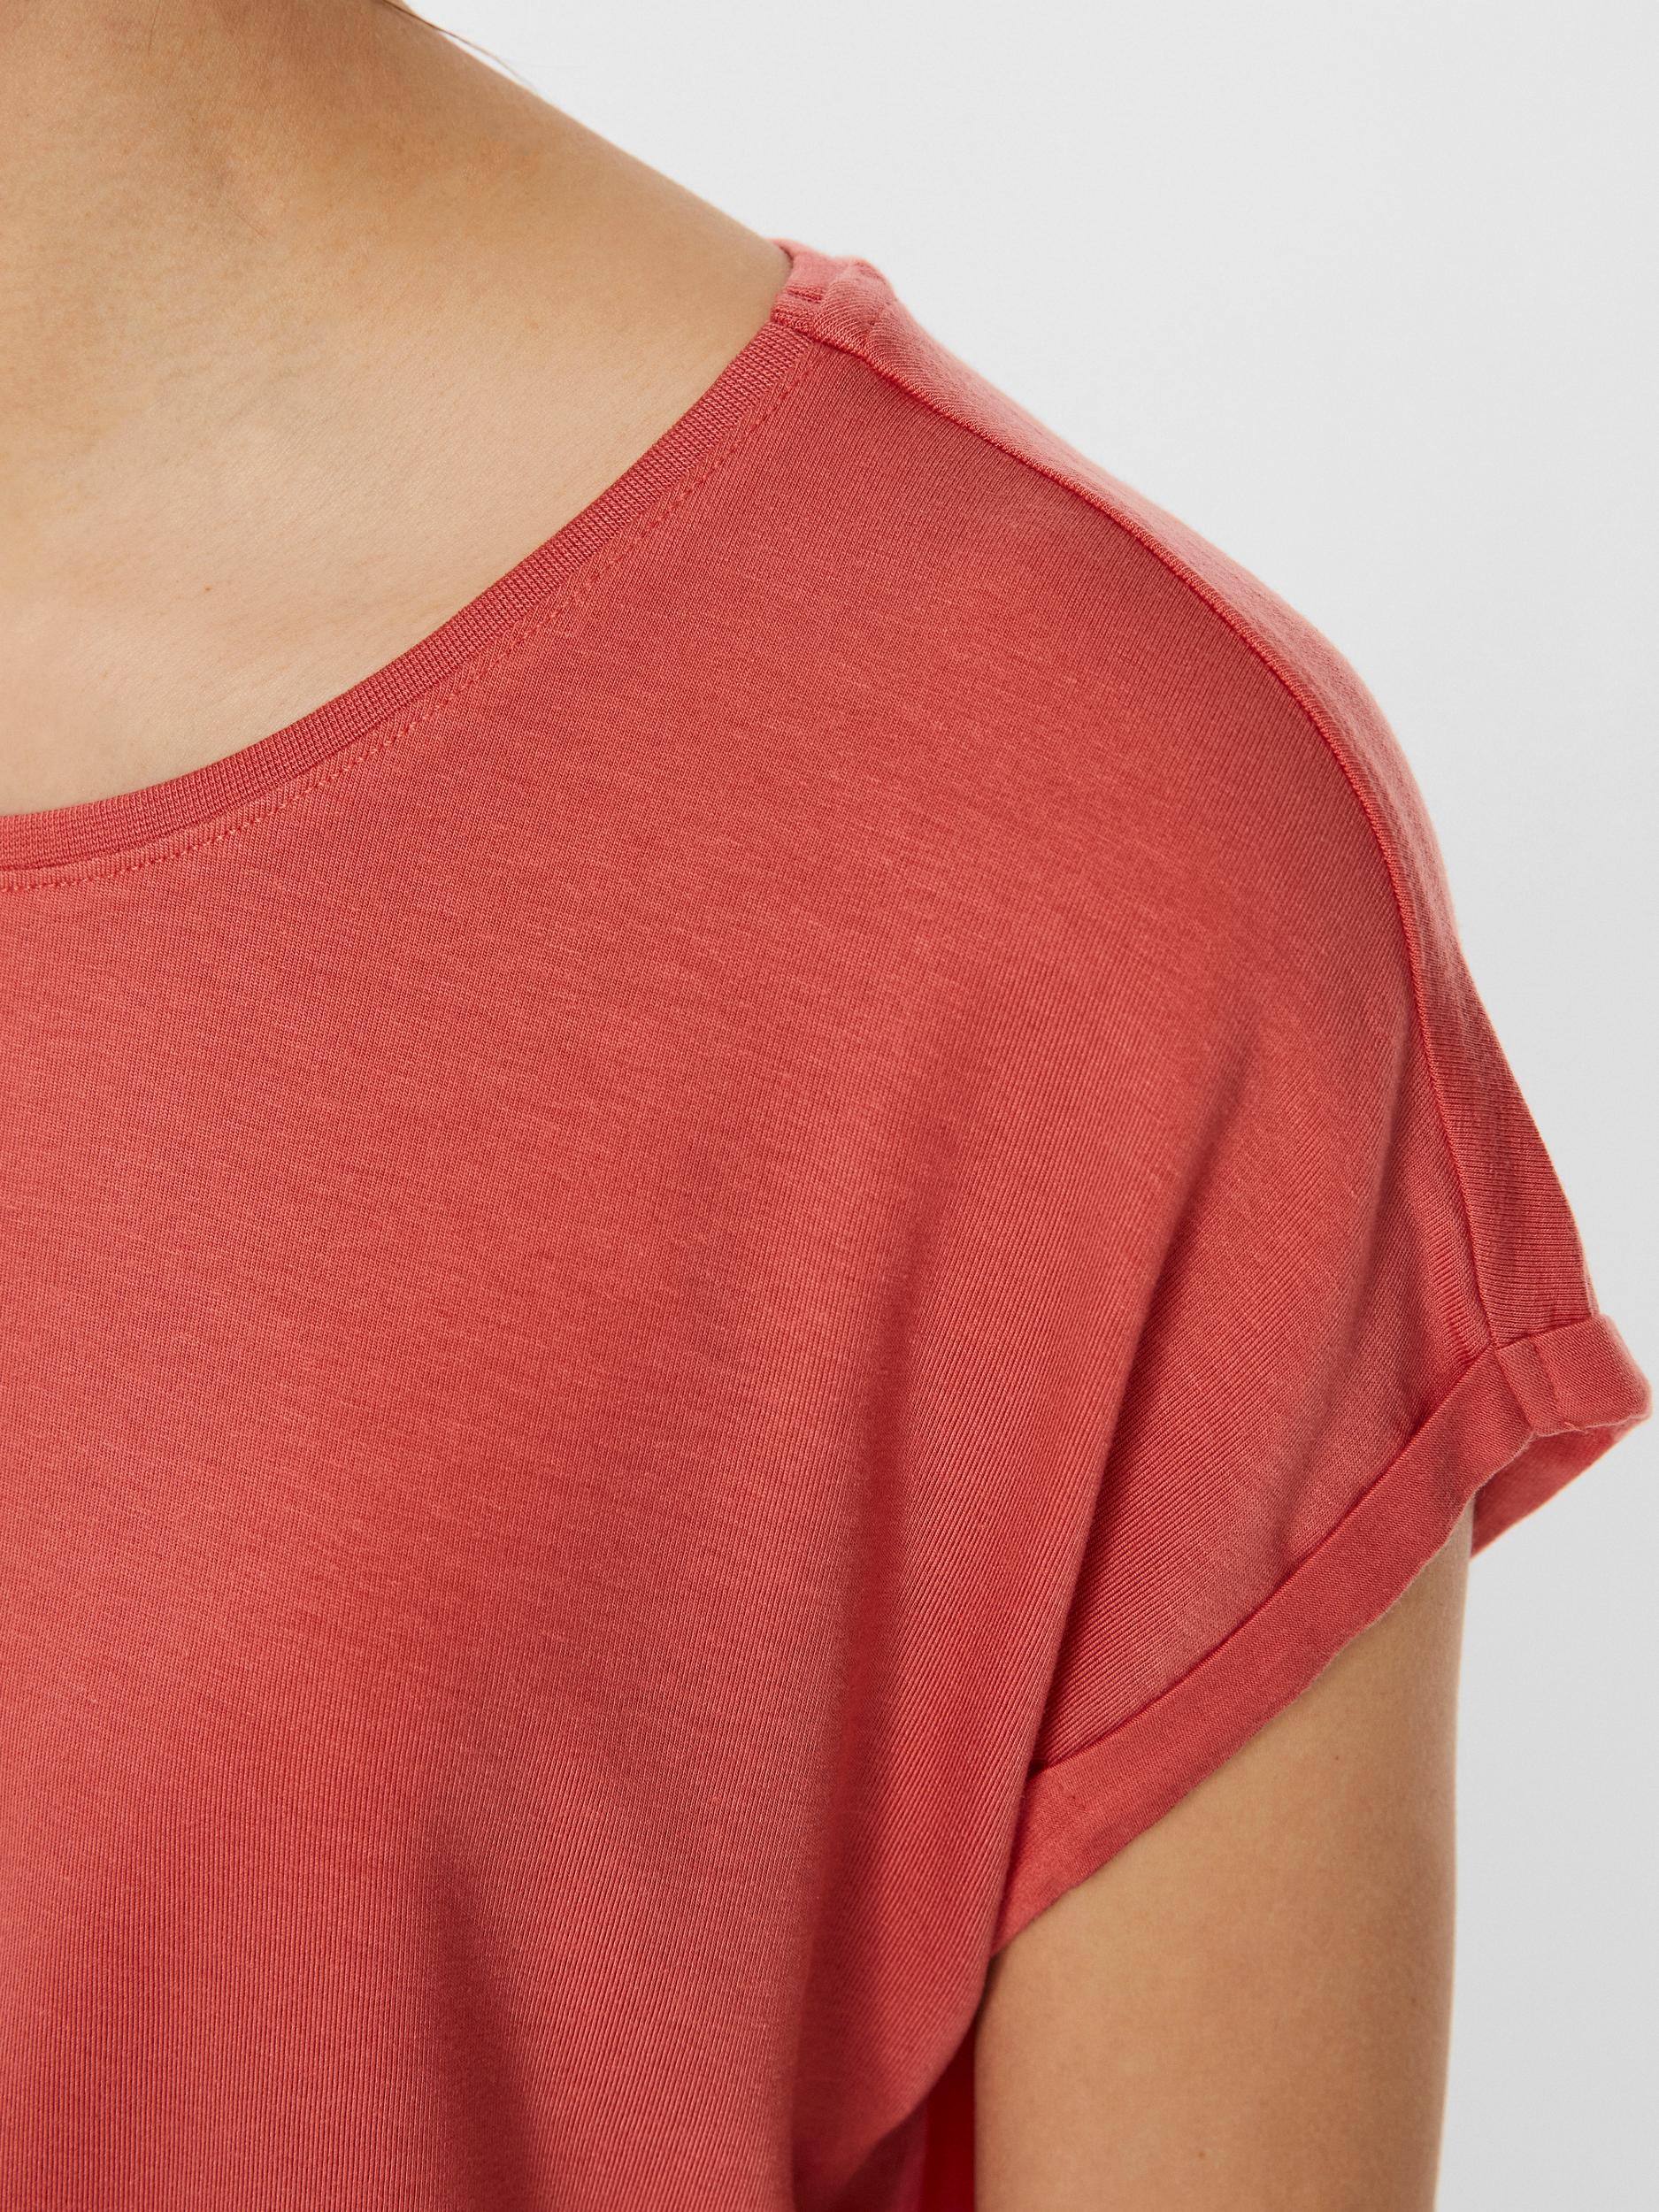 AWARE | Ava T-Shirt, SPICED CORAL, large